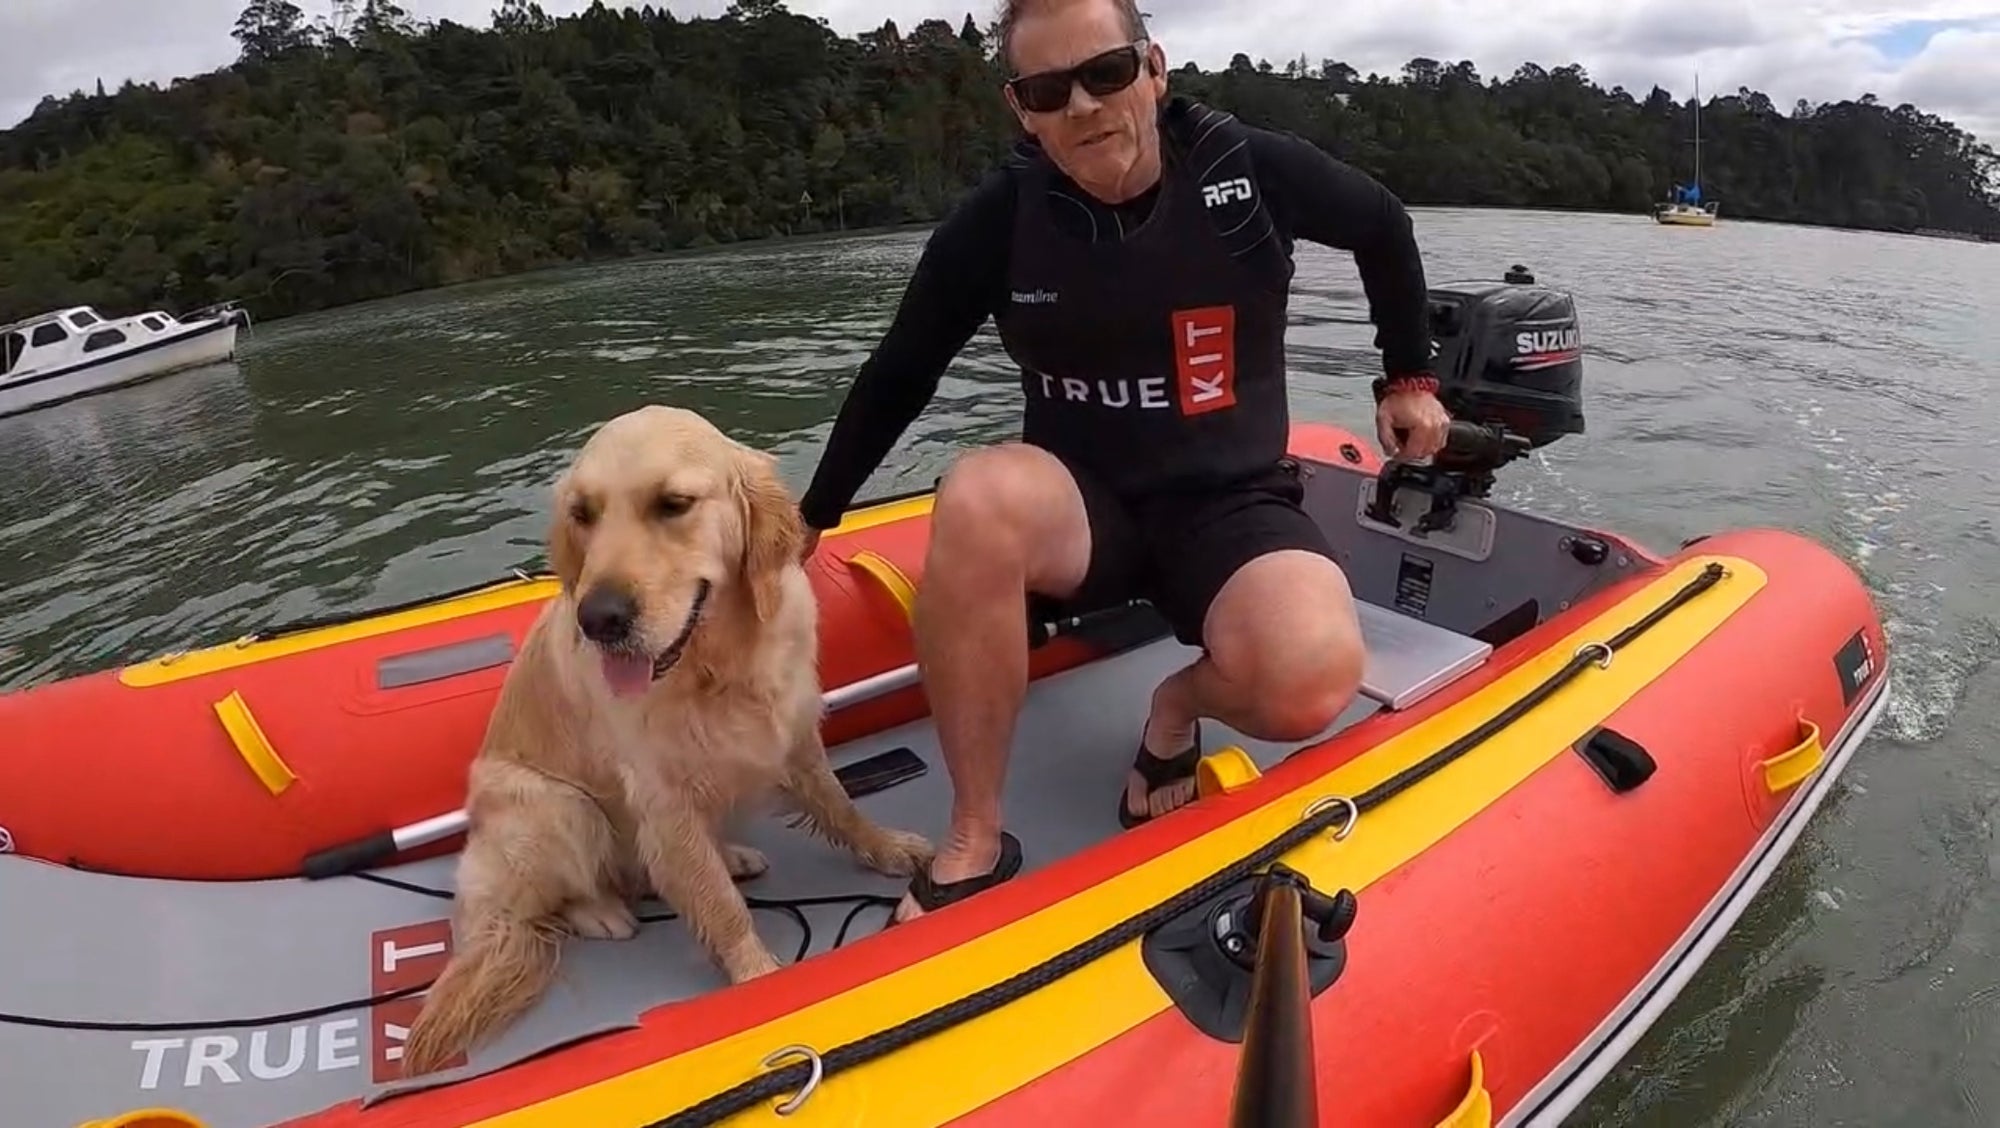 True Kit Discoverys are perfect dog boats with the landing craft bow making access very easy